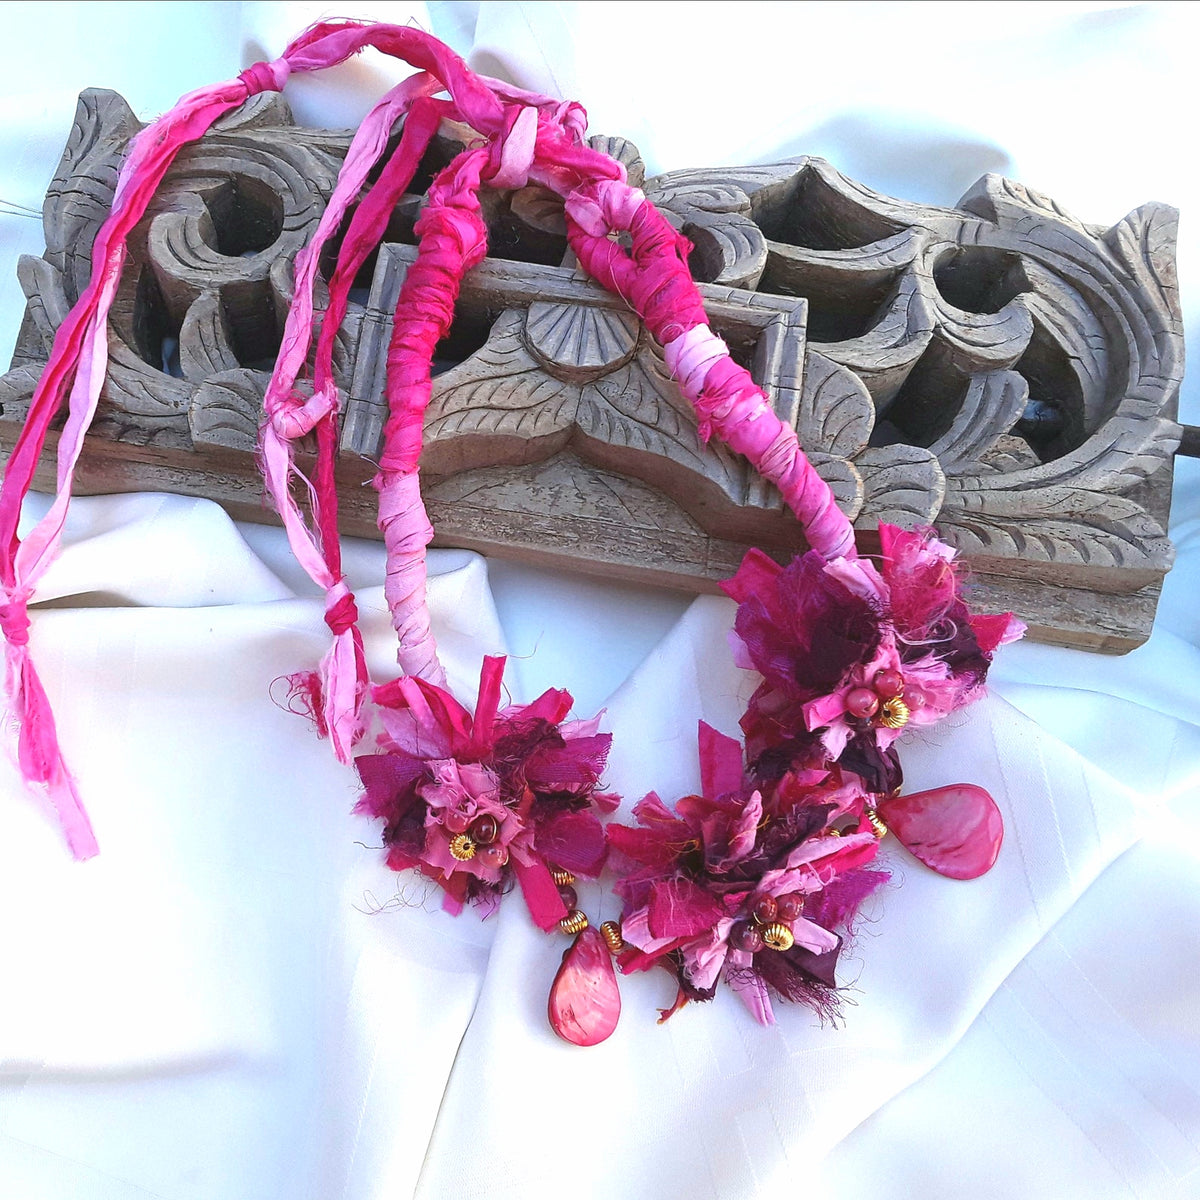 Boho Pink Sari Silk Flower Statement Necklace - Gypsy Style Gift for Her